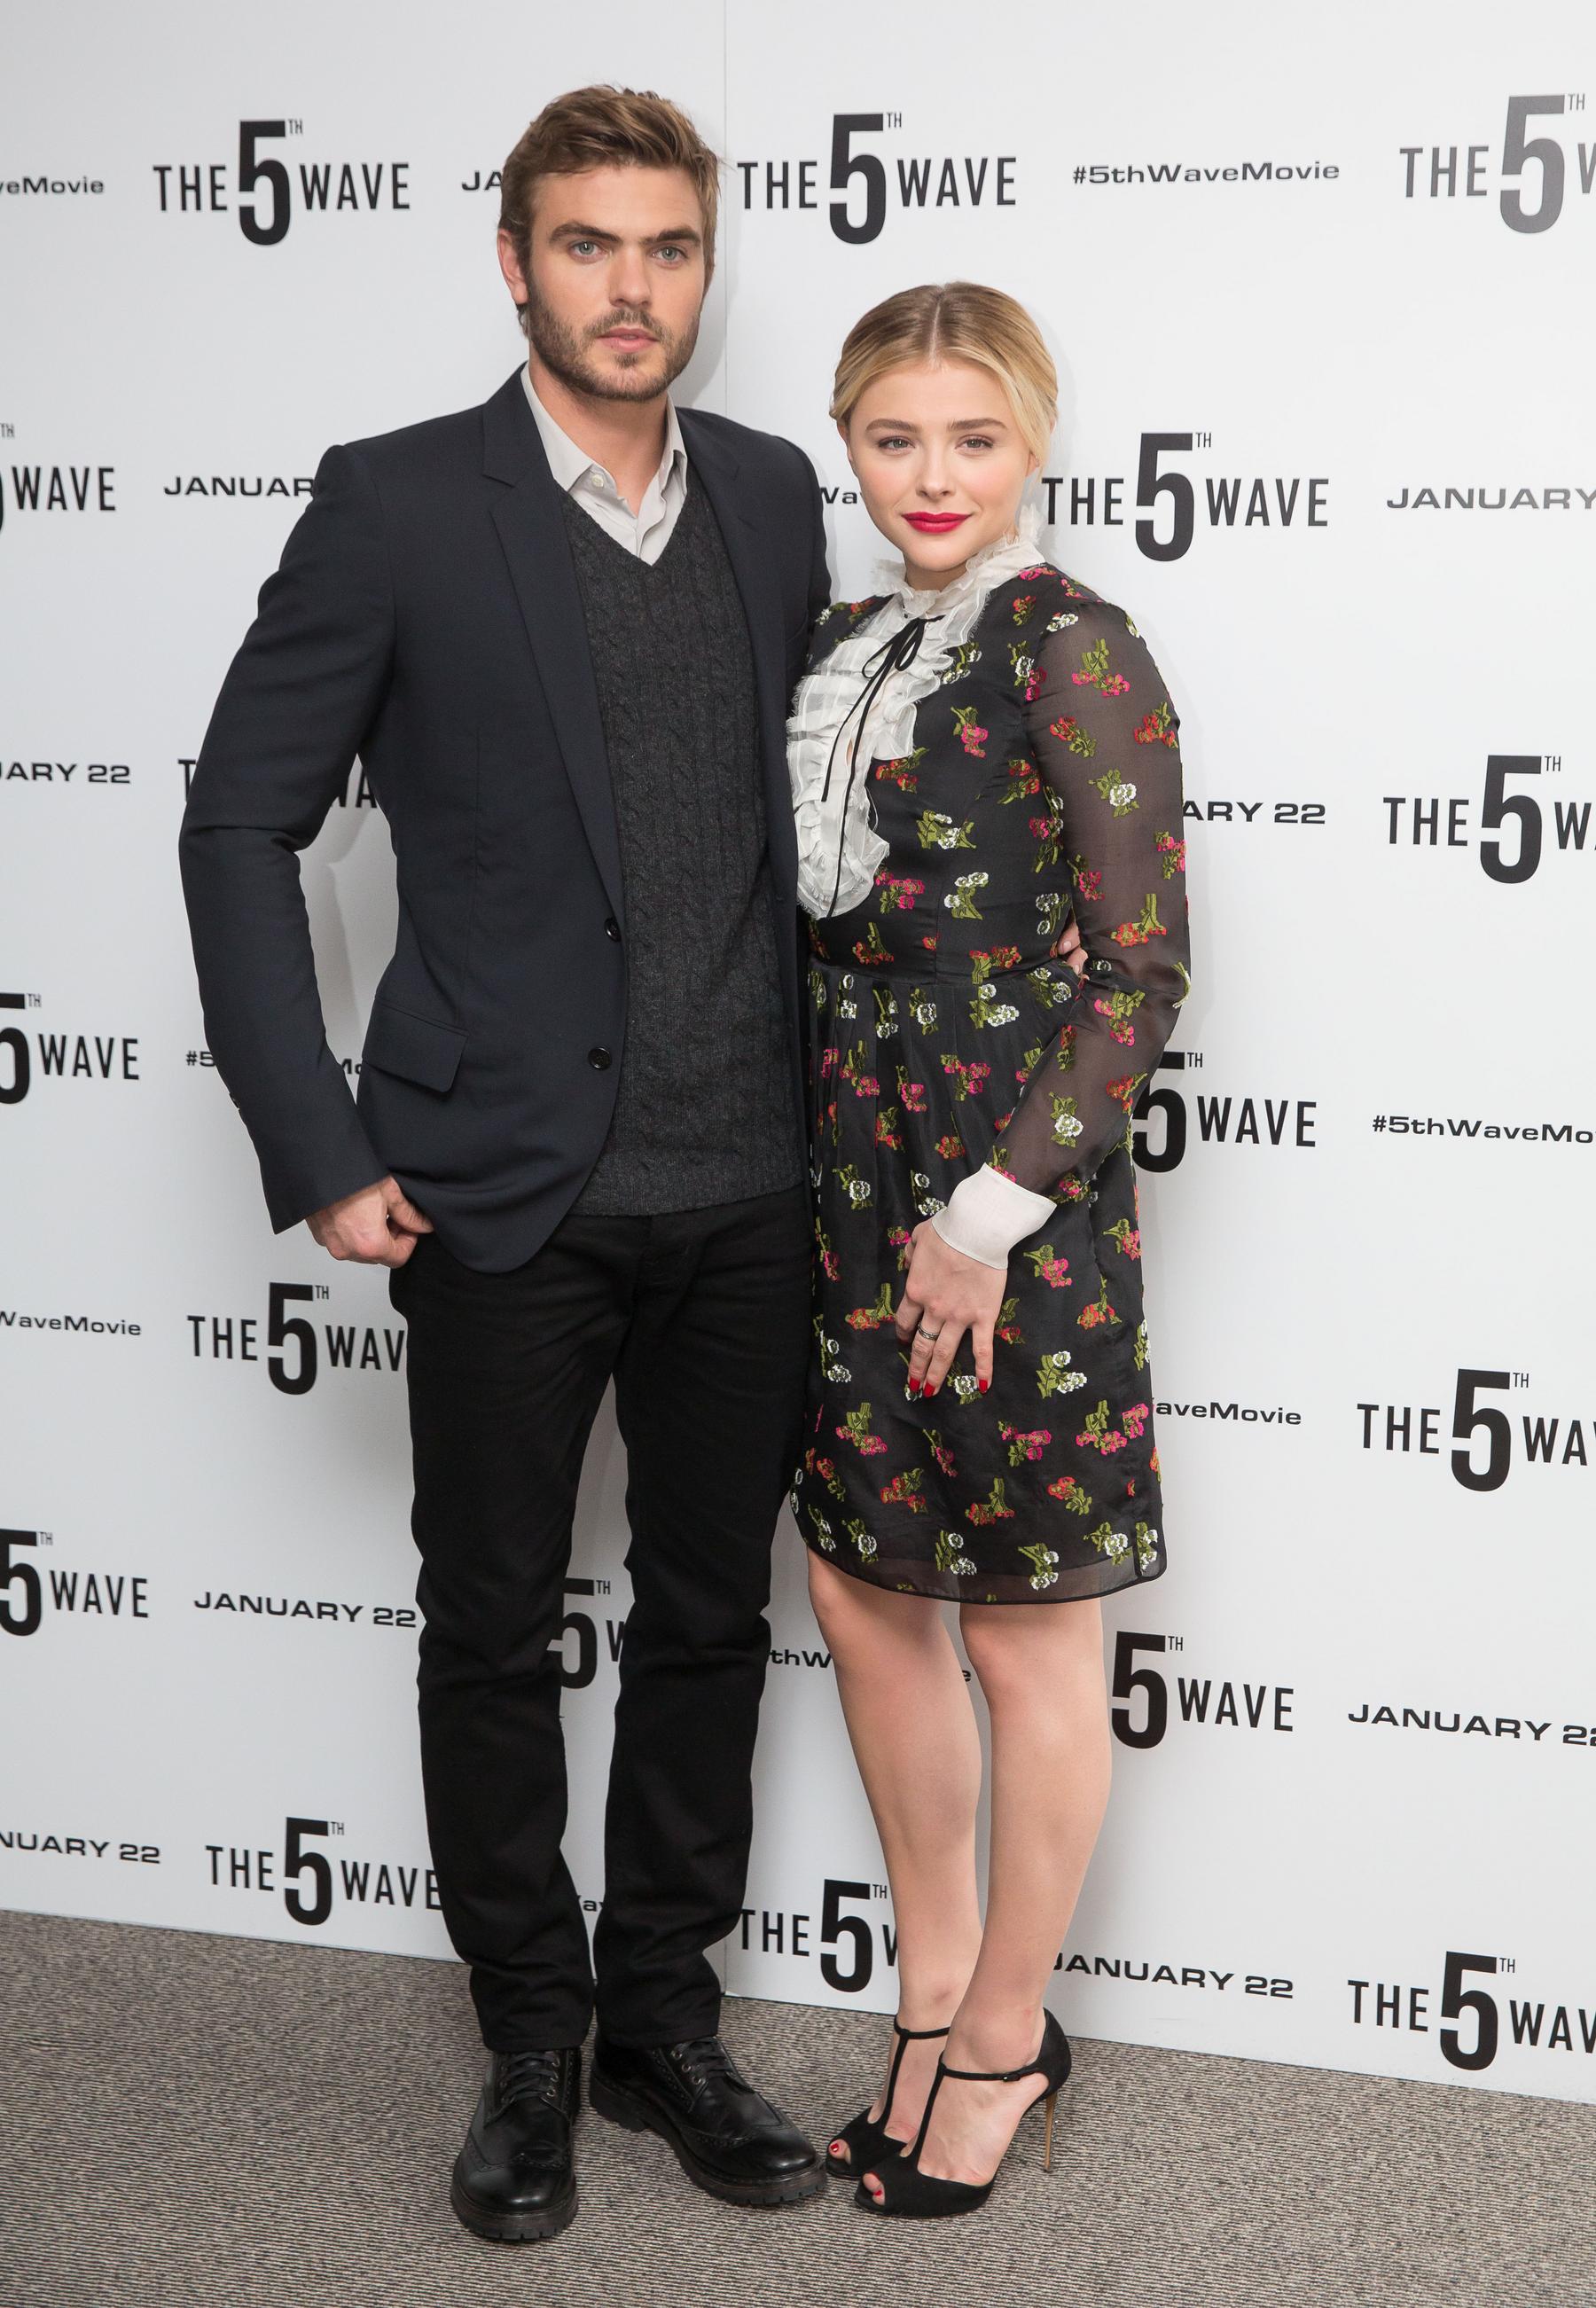 Chloe Moretz and Alex Roe at The Fifth Wave Photocall Jan Celeb Donut